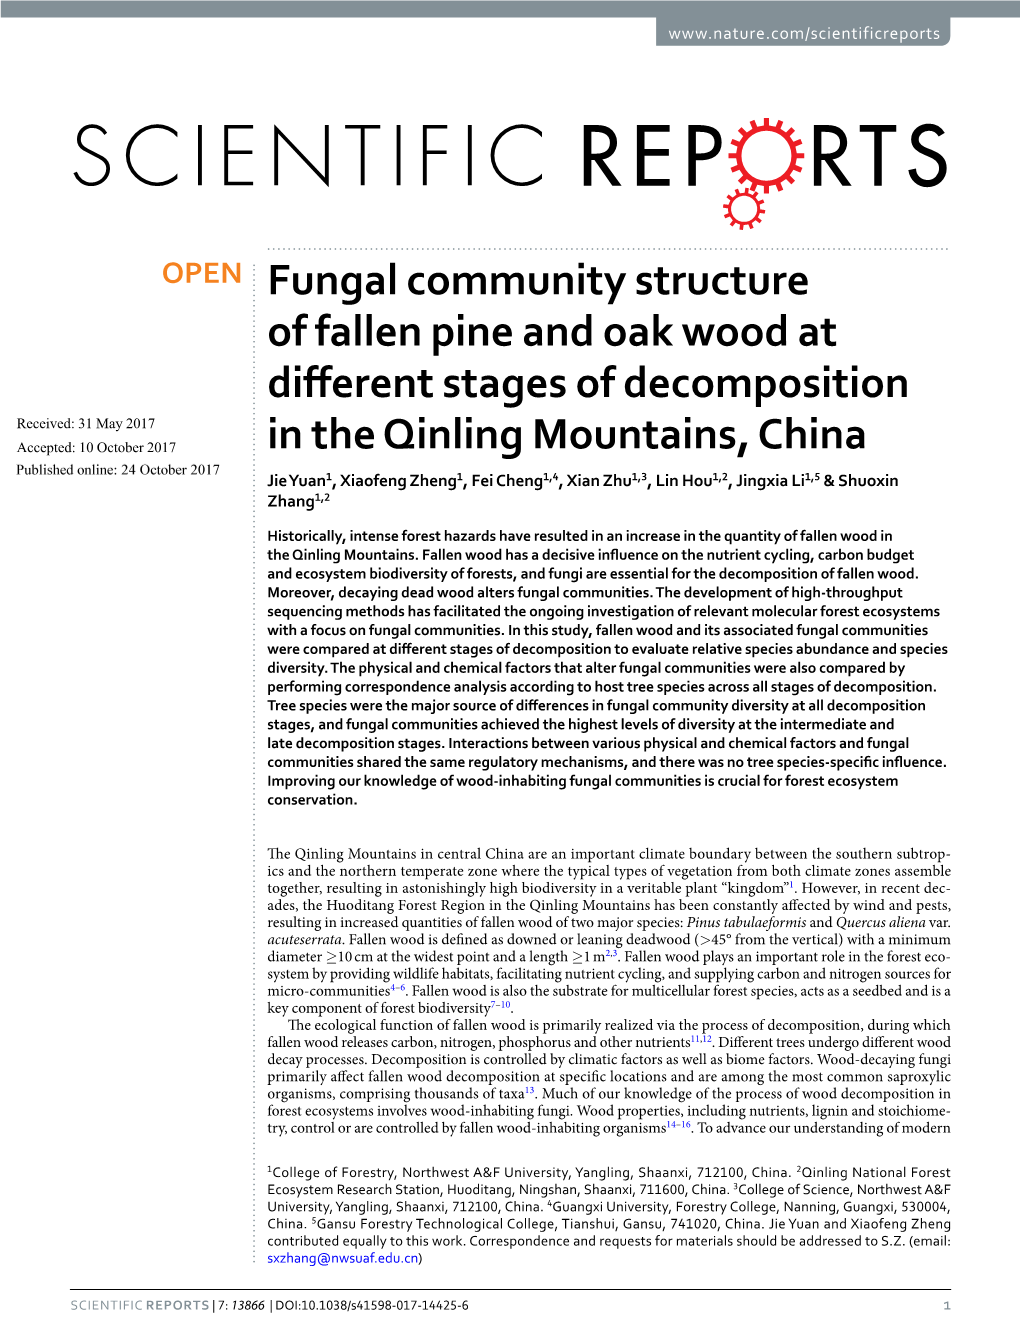 Fungal Community Structure of Fallen Pine and Oak Wood at Different